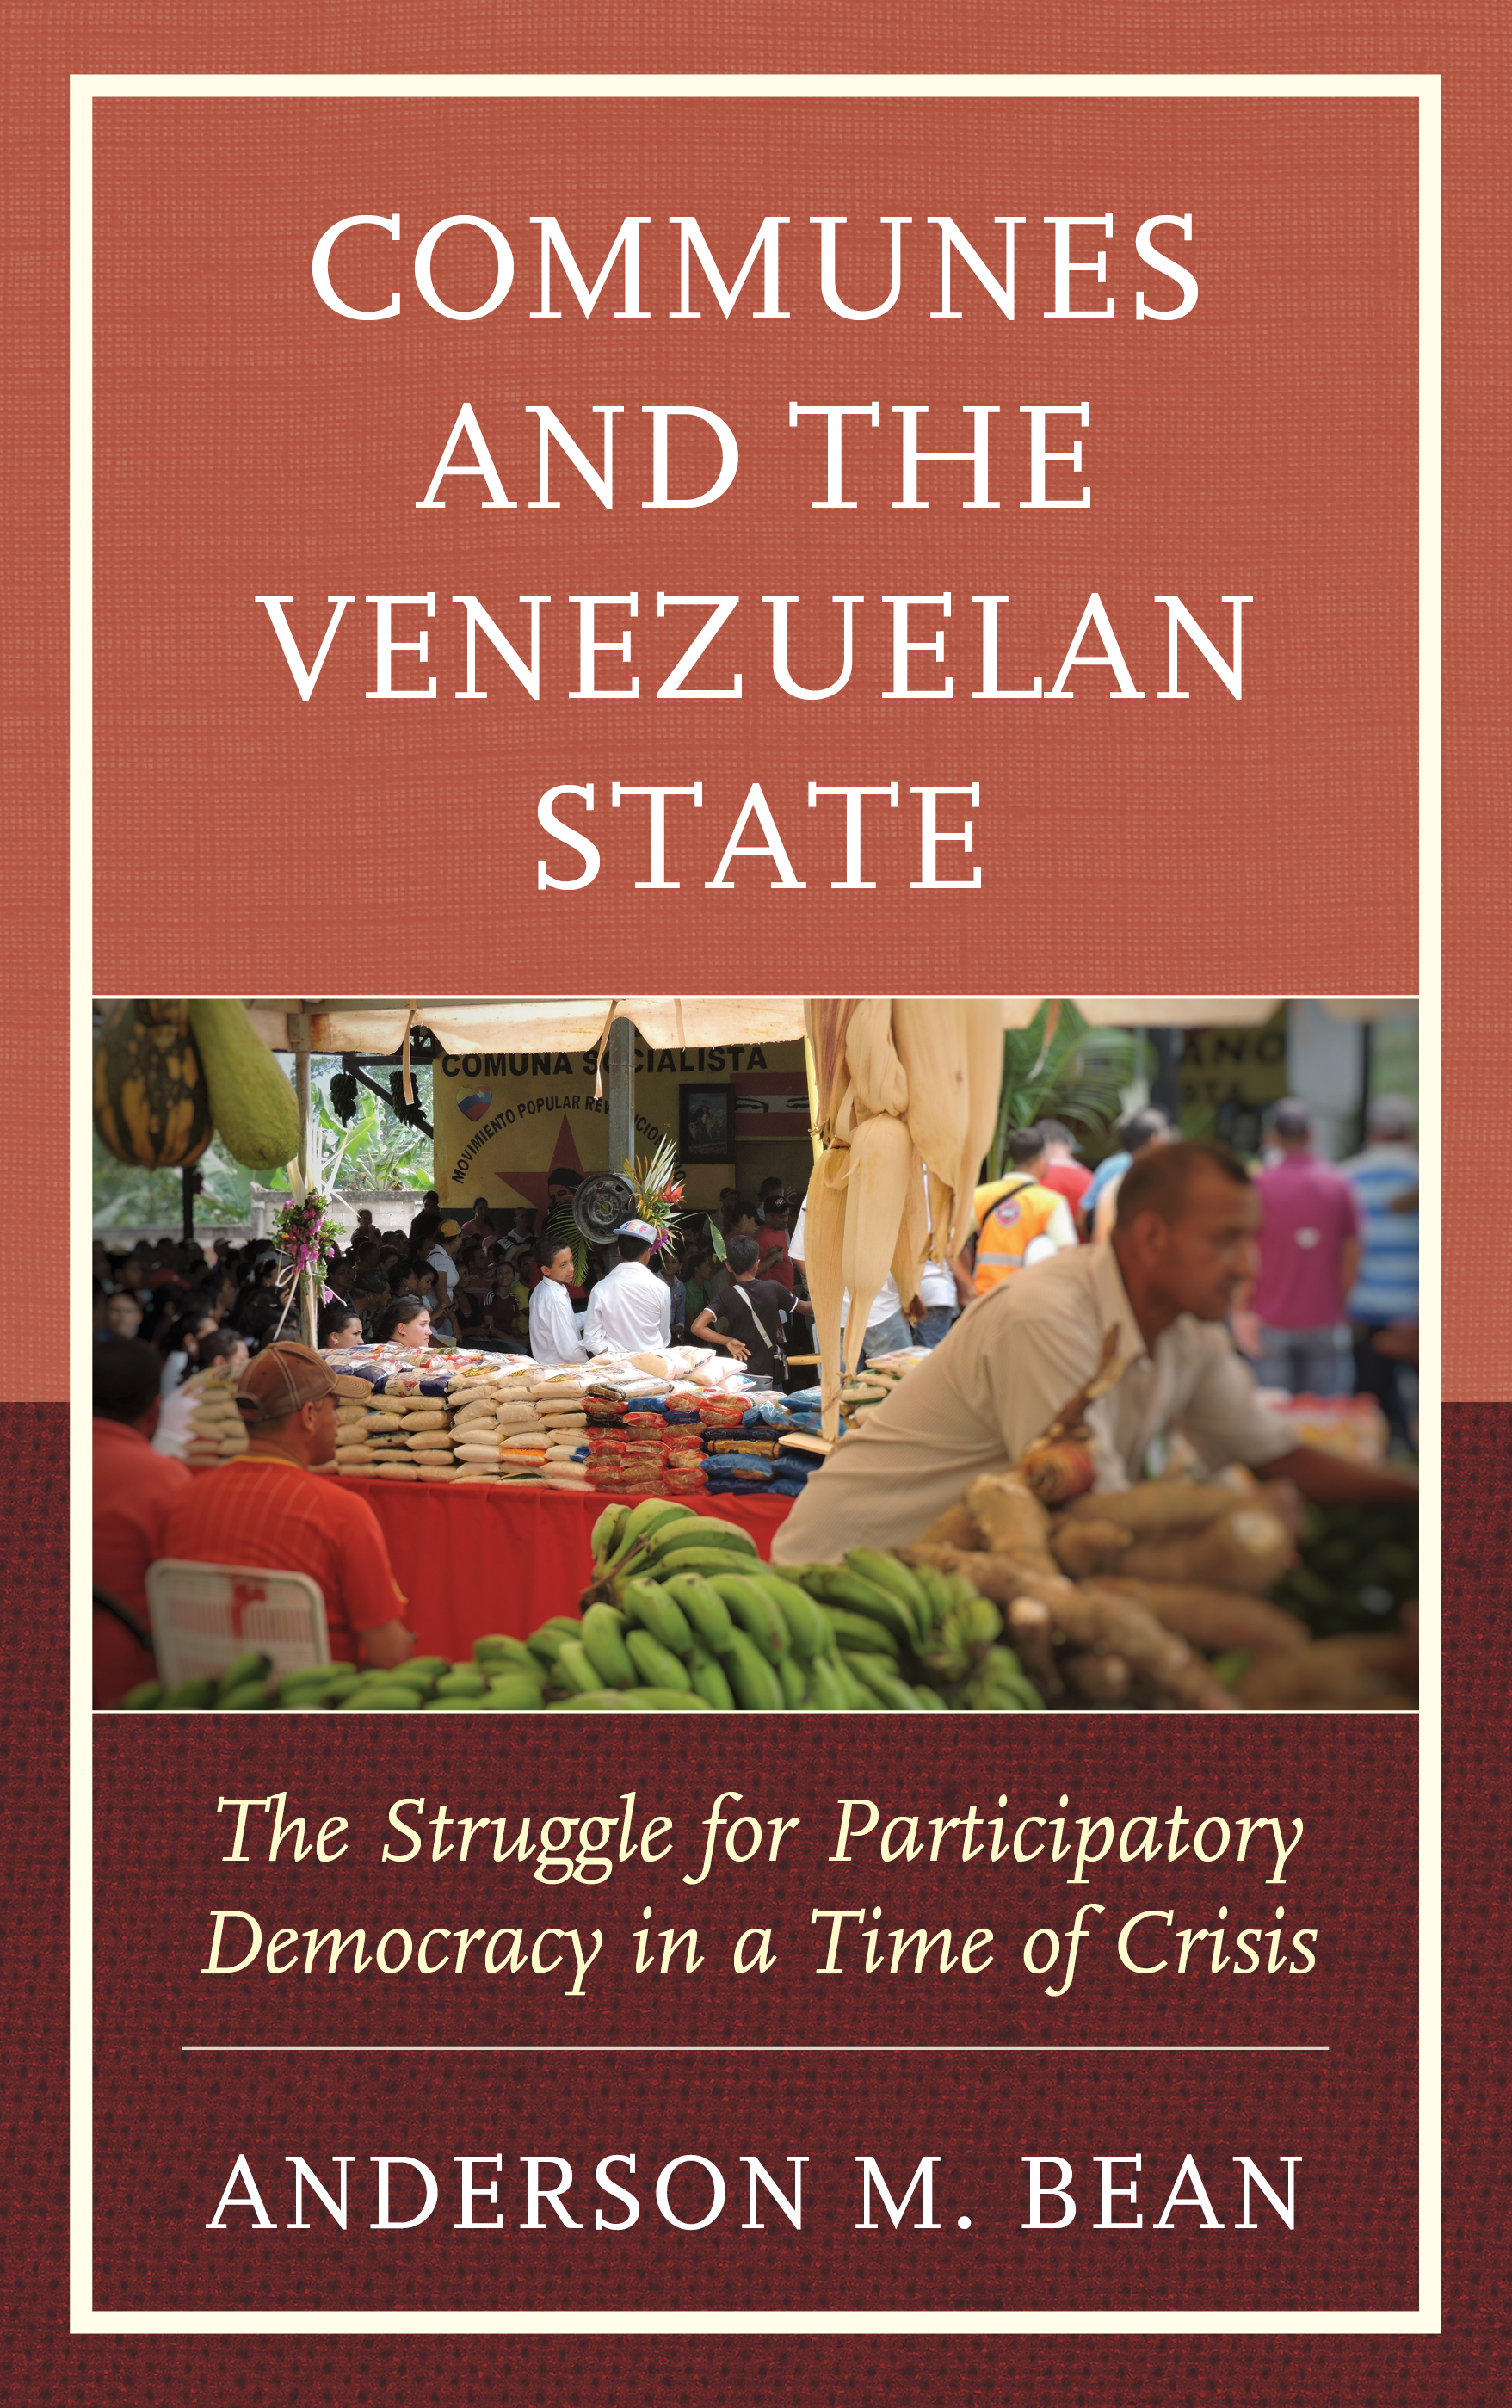 Communes and the Venezuelan State: The Struggle for Participatory Democracy in a Time of Crisis